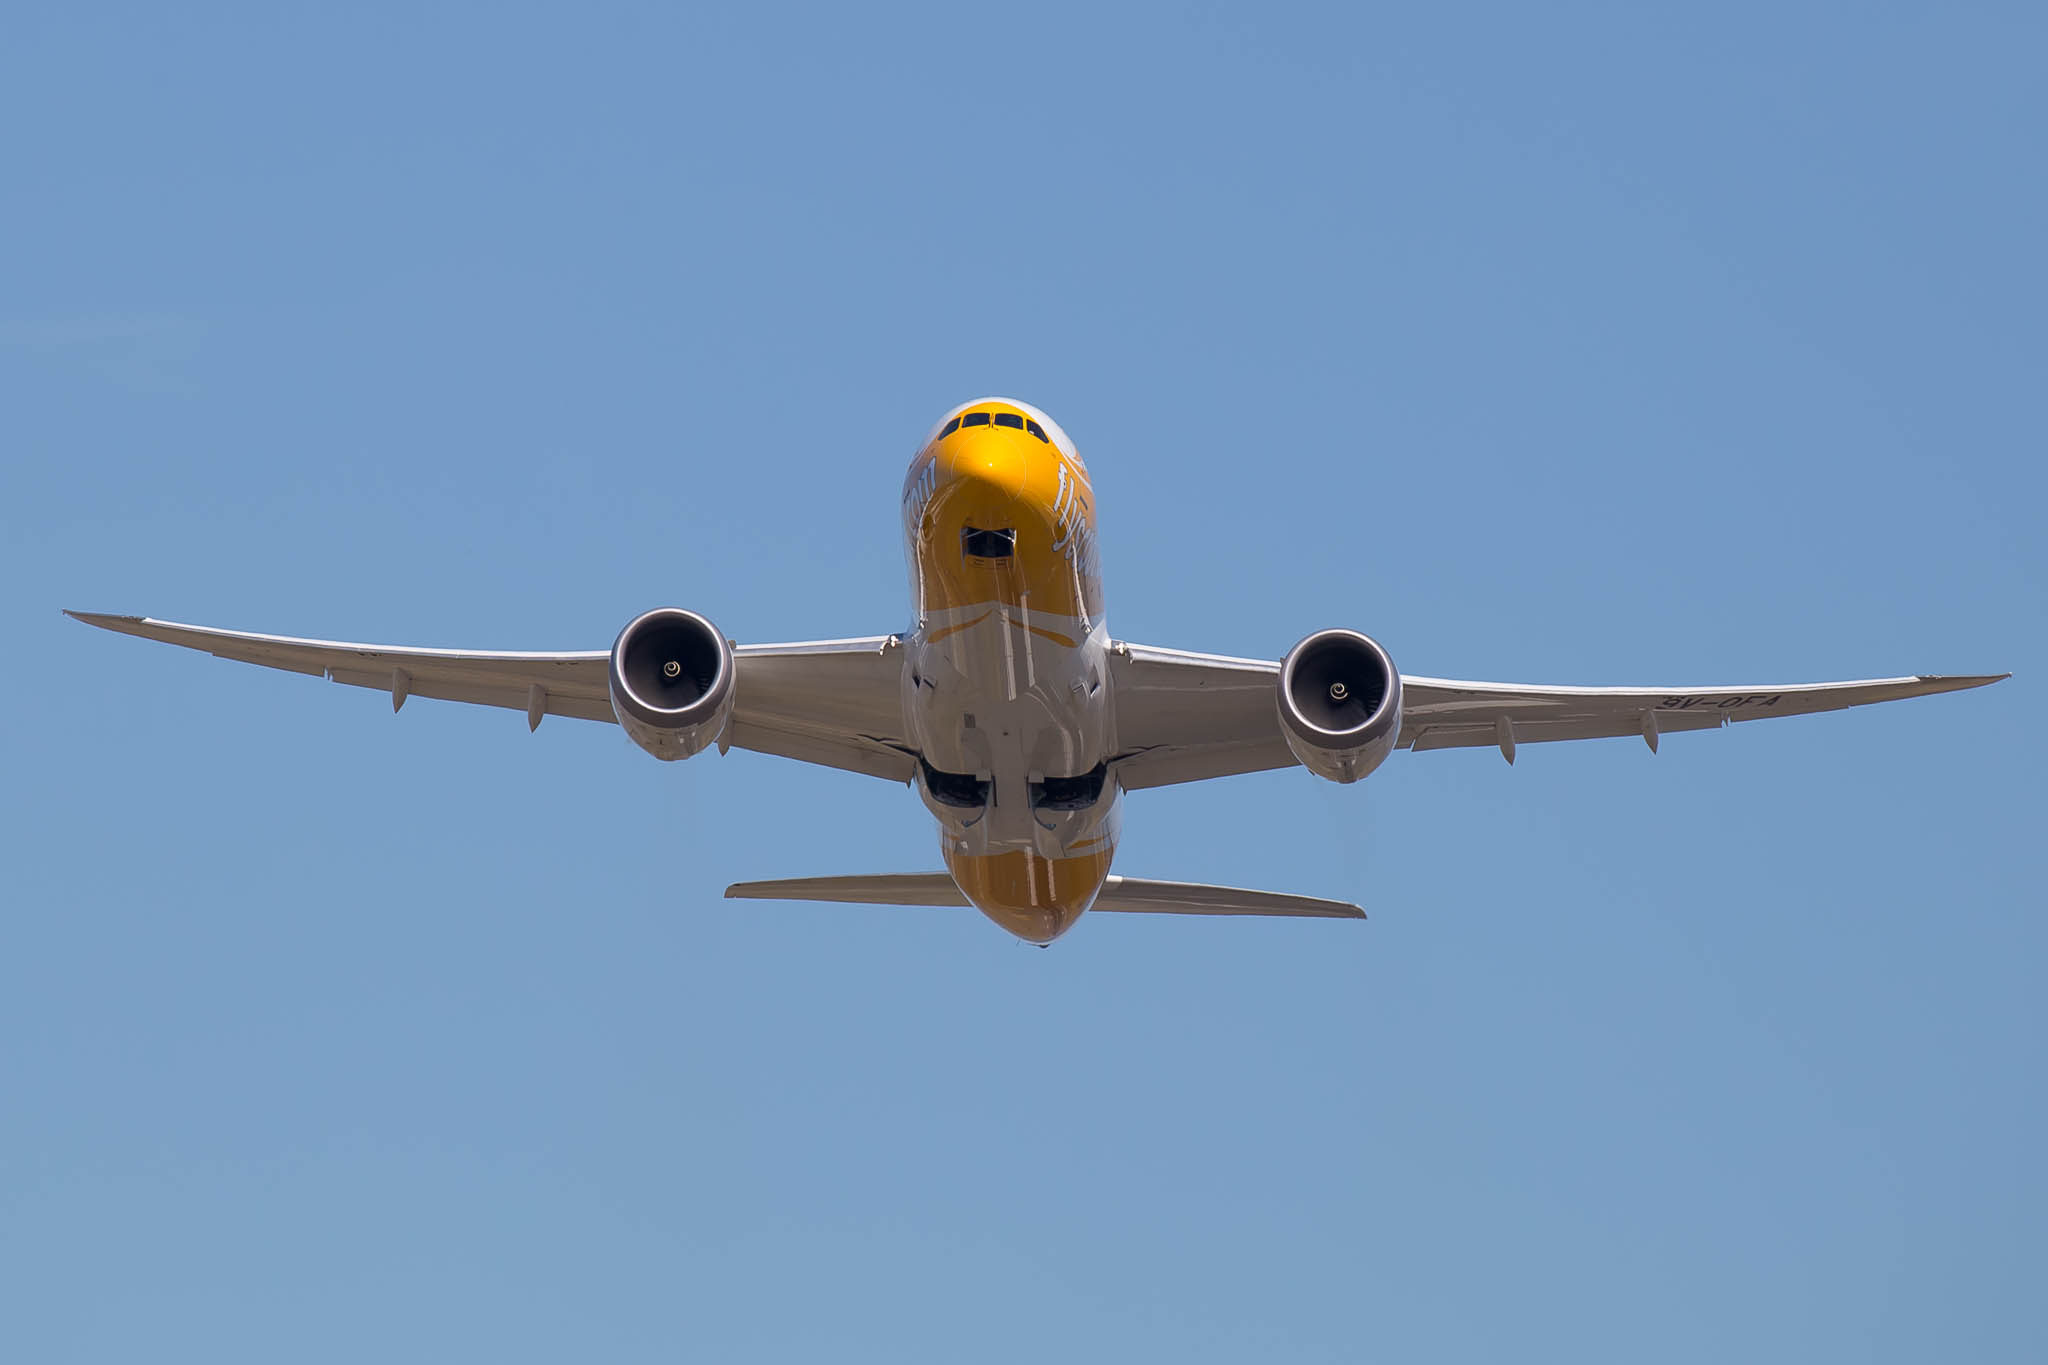 a yellow and white airplane flying in the sky